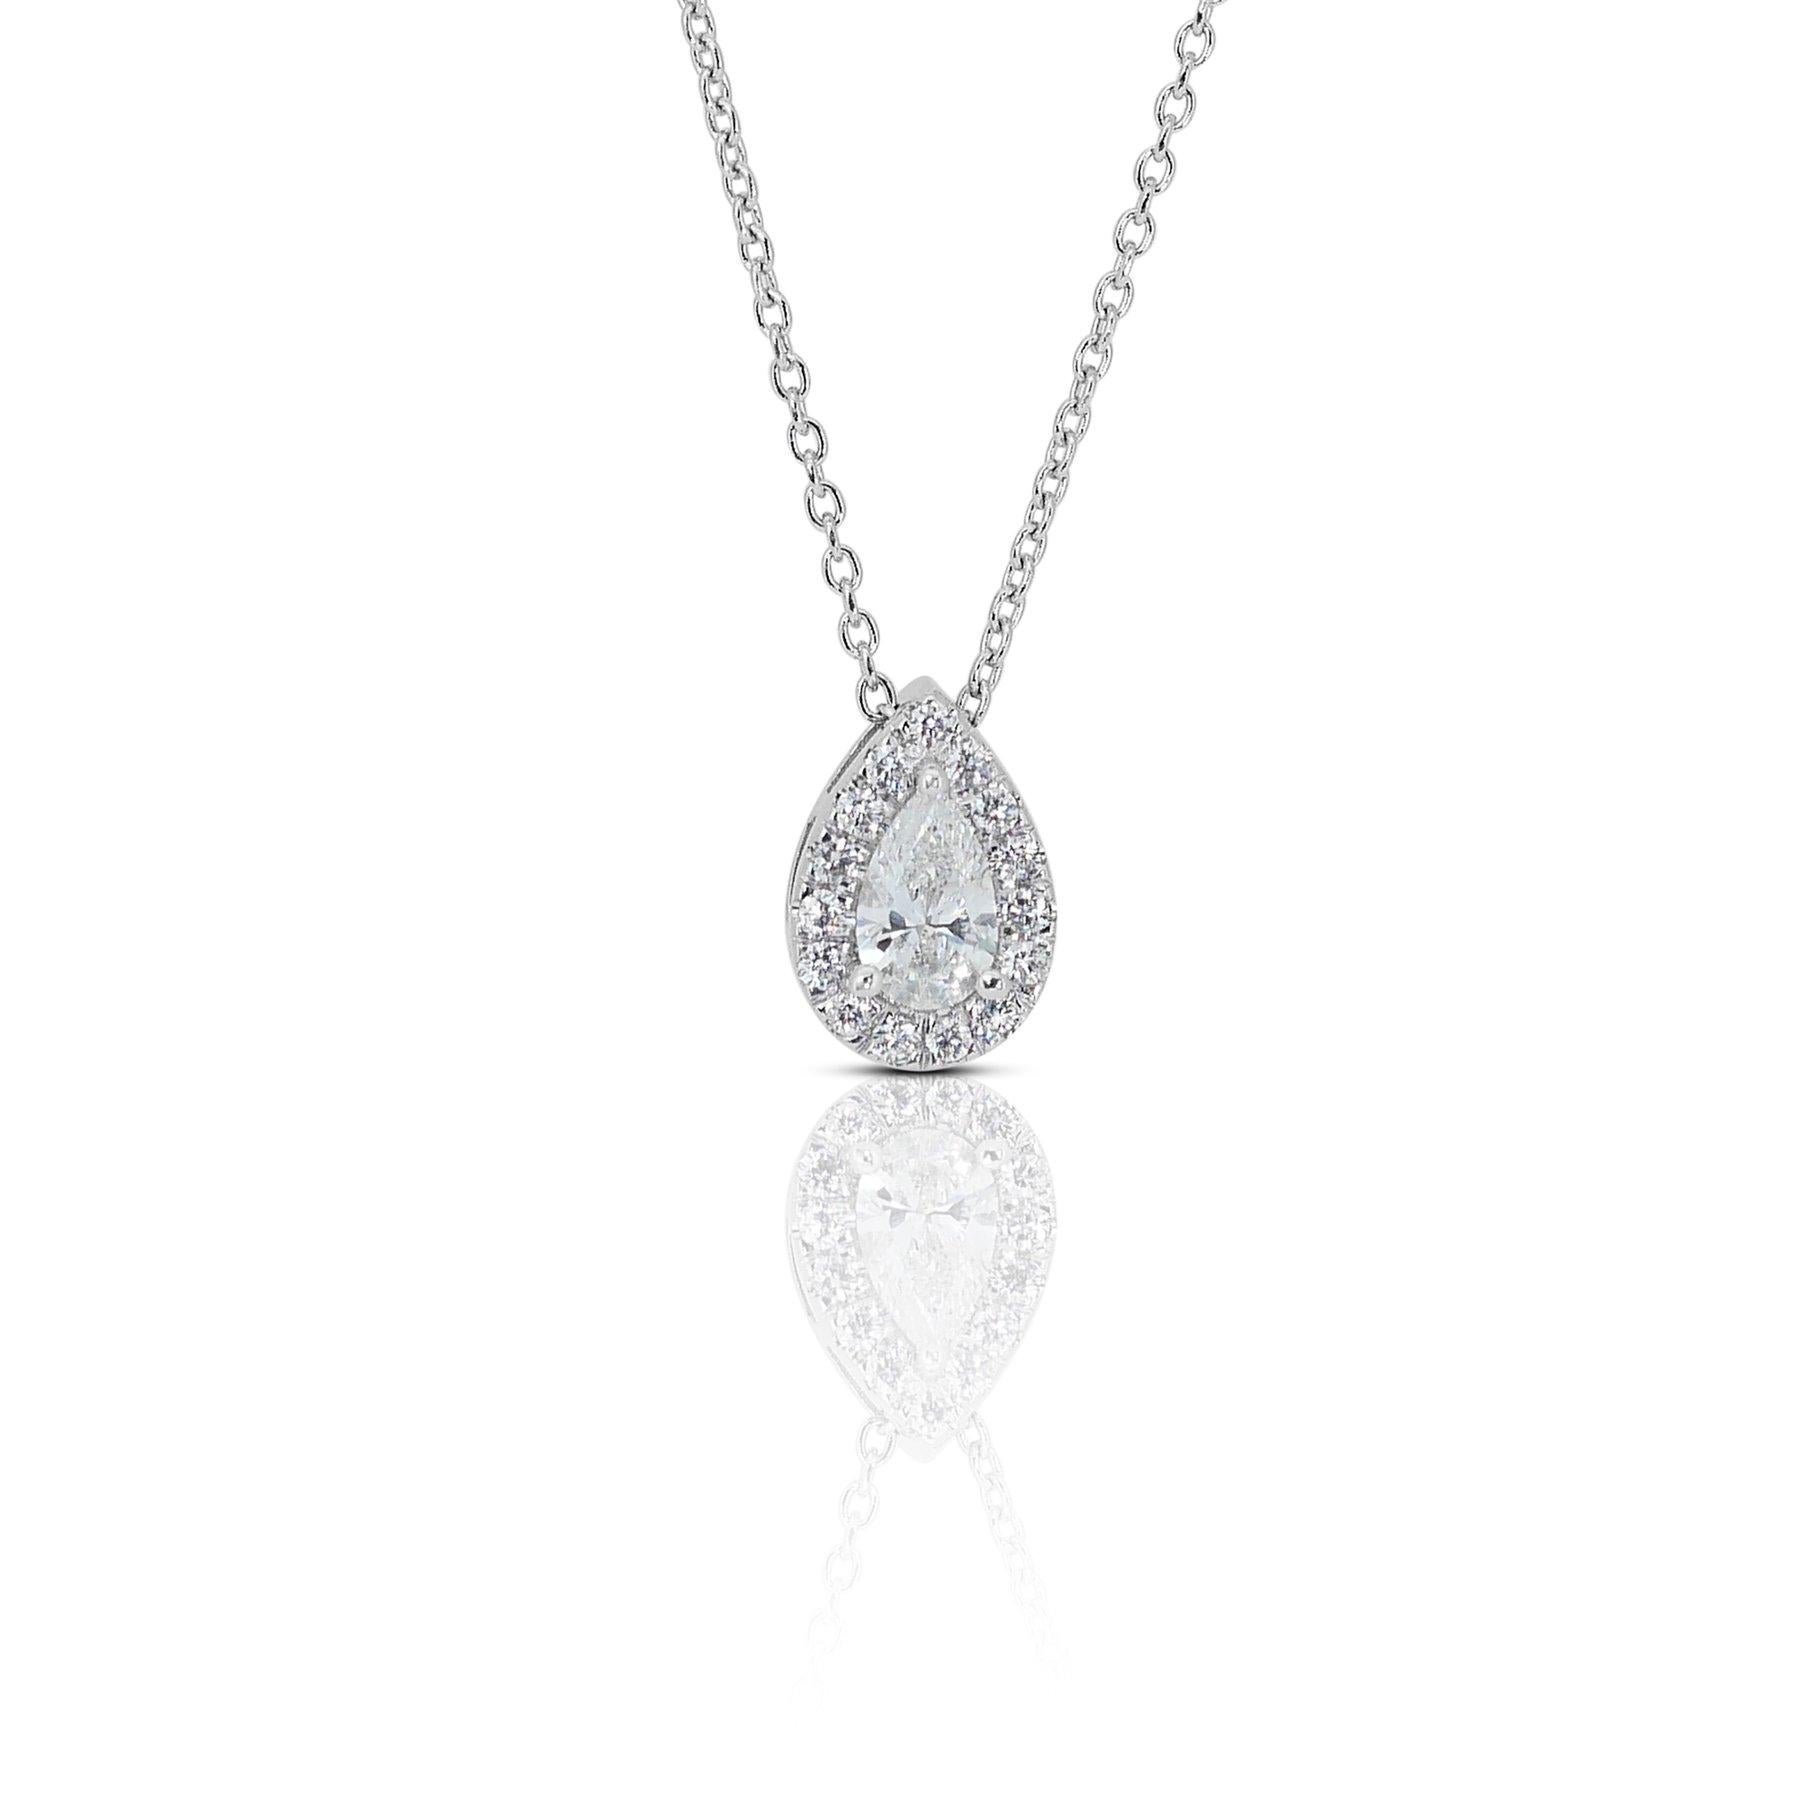 Beautiful 0.71 ct Pear Diamond Halo Necklace in 18k White Gold – GIA Certified In New Condition For Sale In רמת גן, IL